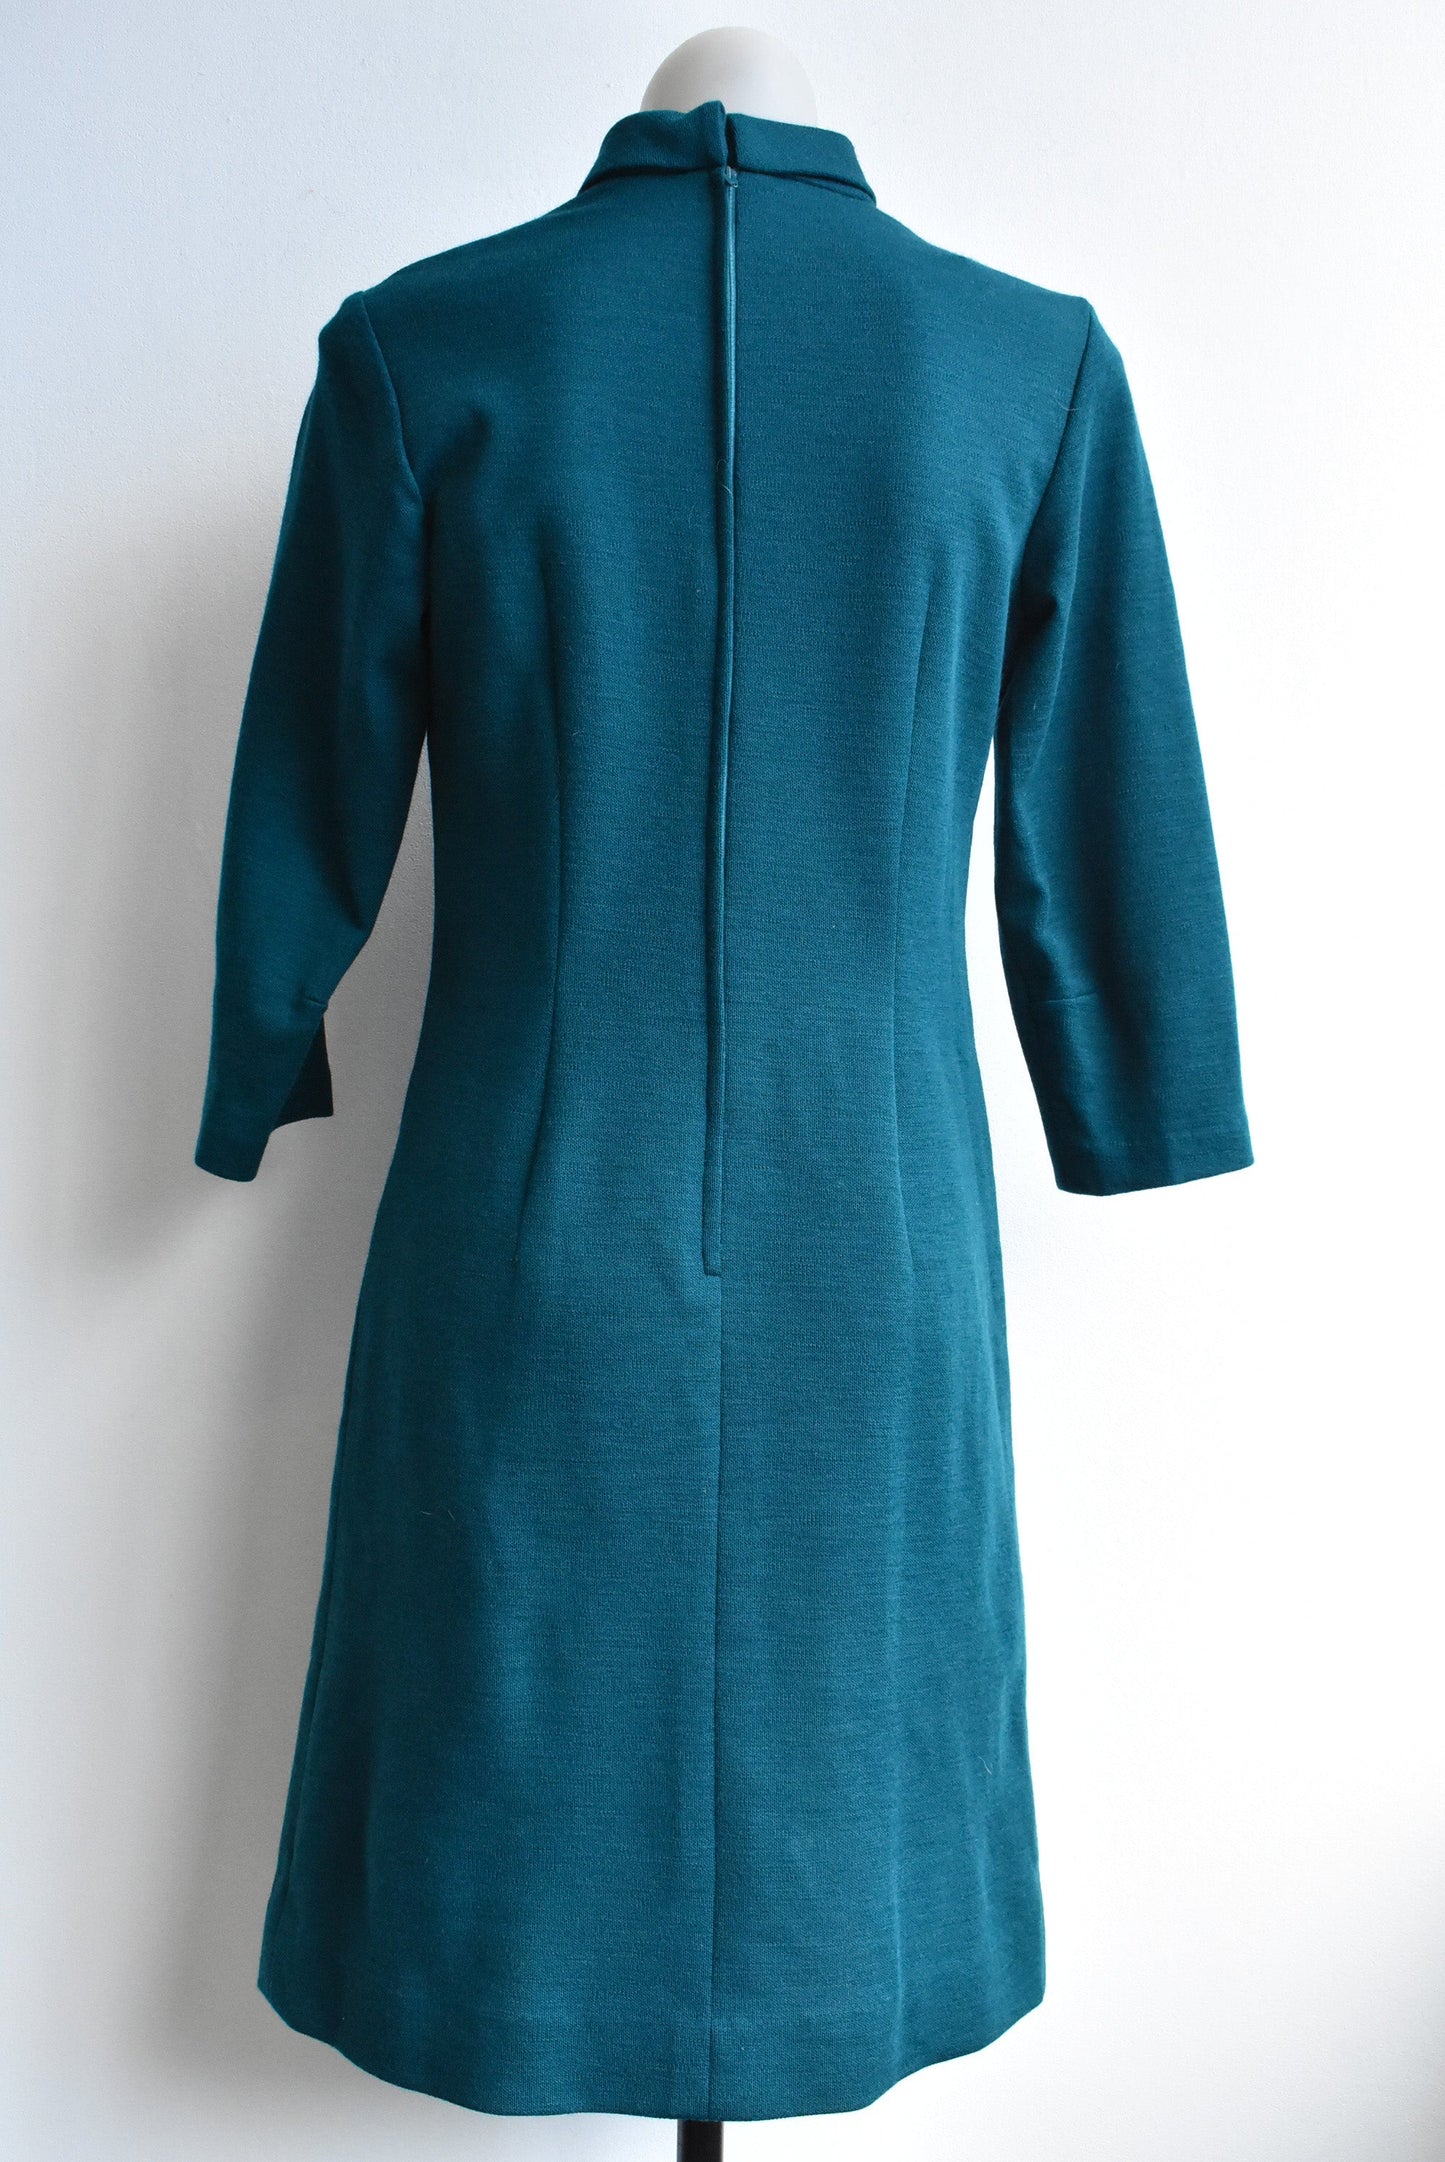 Superior Fashion vintage woolly long-sleeved green dress